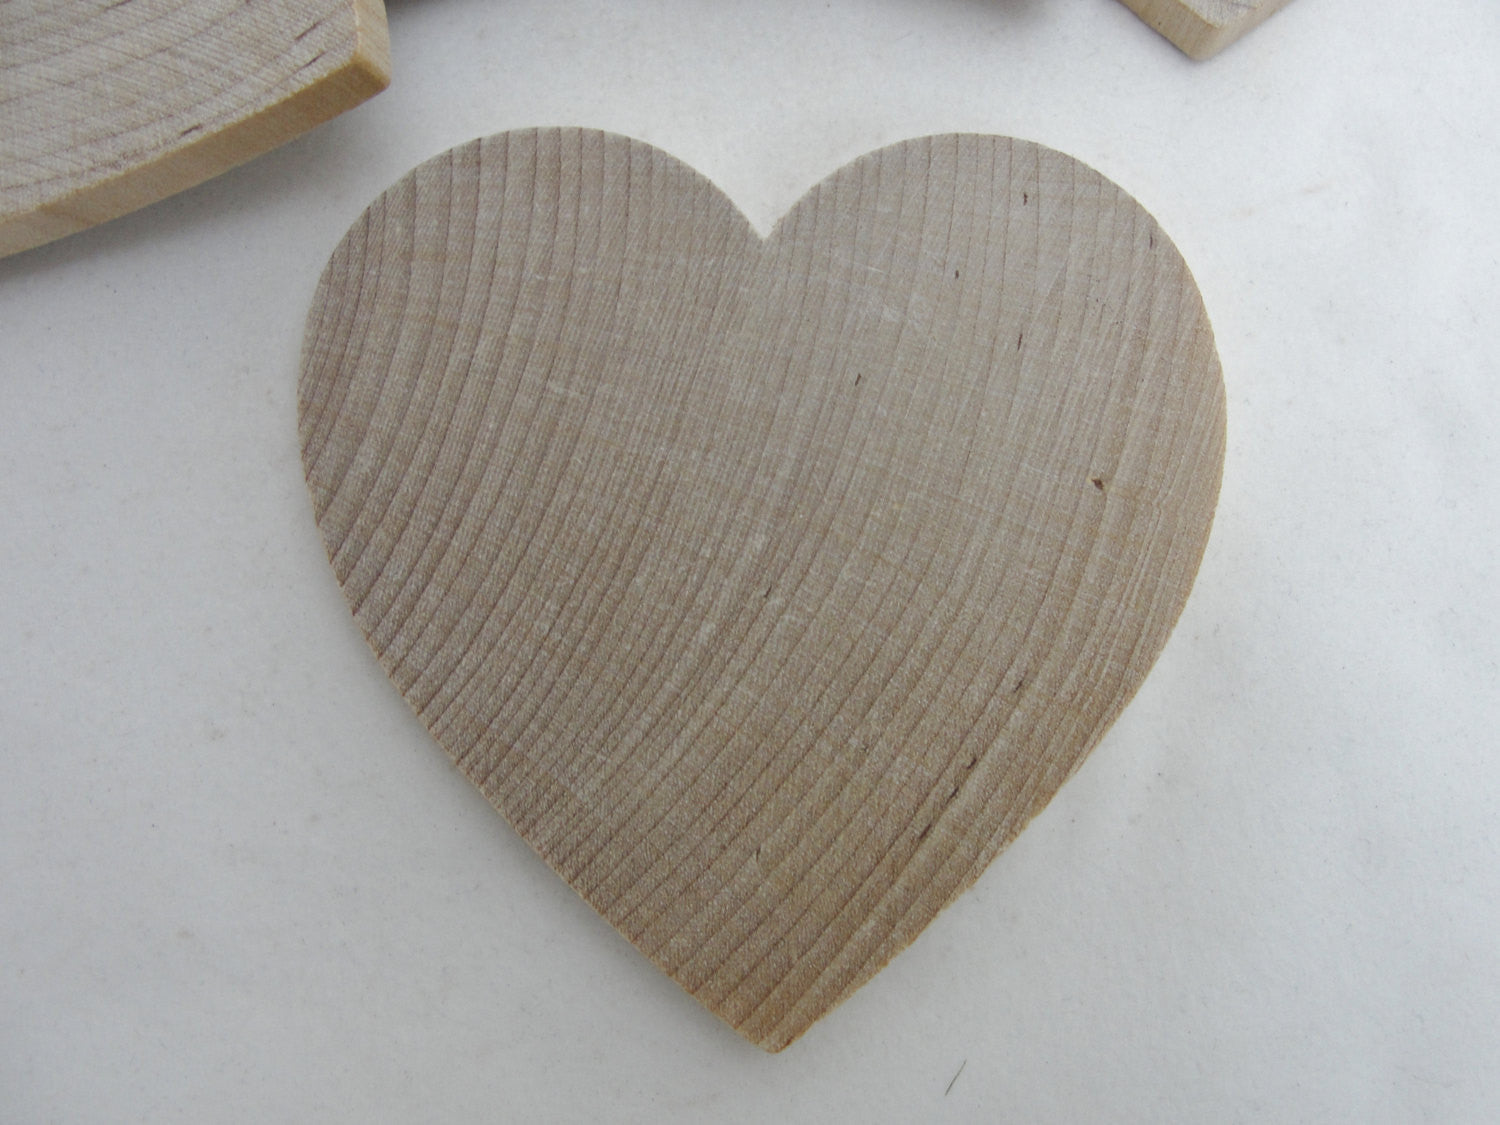 6 Wooden hearts 3 inch (3") wide 1/4" thick - Wood parts - Craft Supply House